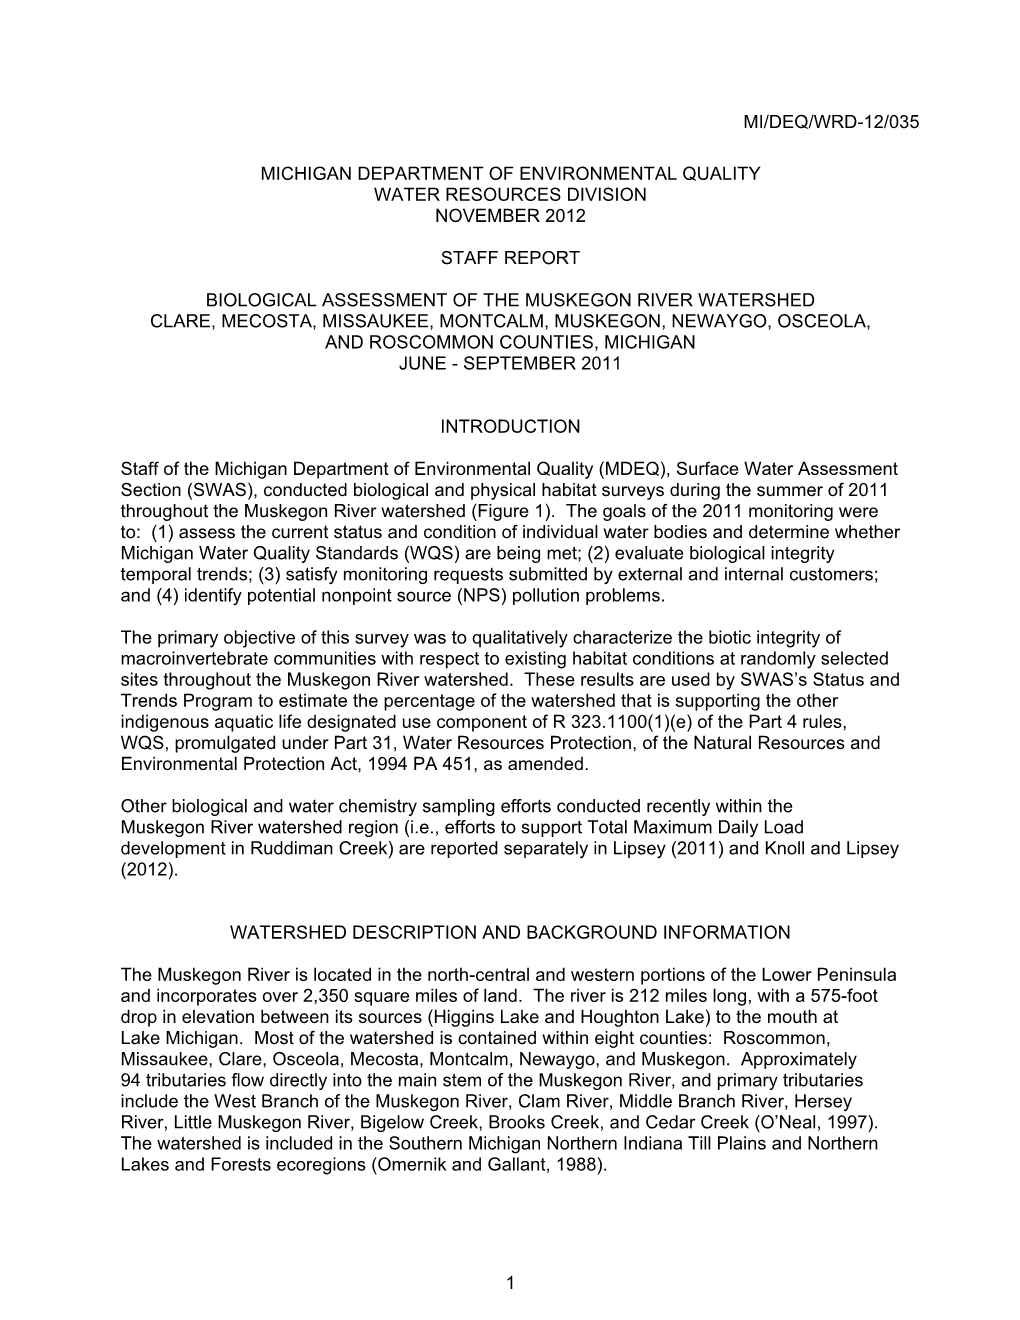 Michigan Department of Environmental Quality Water Resources Division November 2012 Staff Report Biological Assessment of the Mu